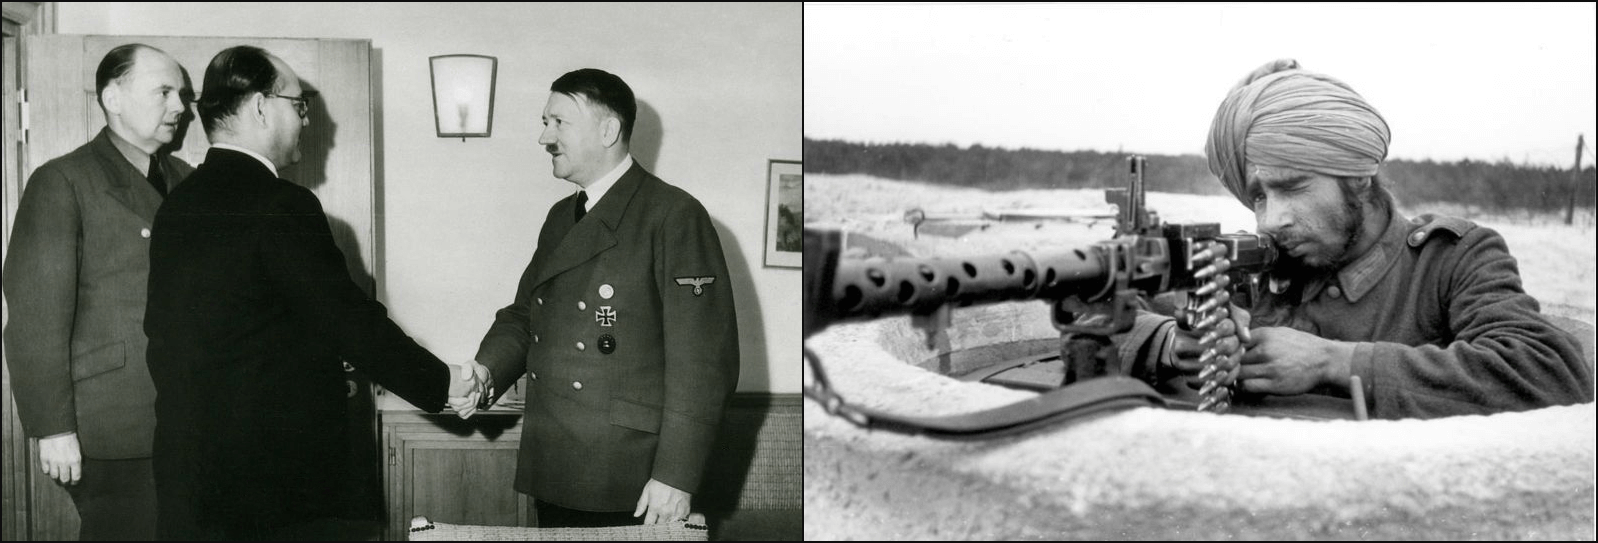 Left: Subhas Chandra Bose, middle, meeting Hitler in East Prussia, Germany May 27, 1942 (Wikimedia Commons). Right: German propaganda photo of Indian Legion soldier near Bordeaux, France, March 21, 1944 (Bundesarchiv, Bild 101I-263-1580-06/Wette via Wikimedia Commons). 